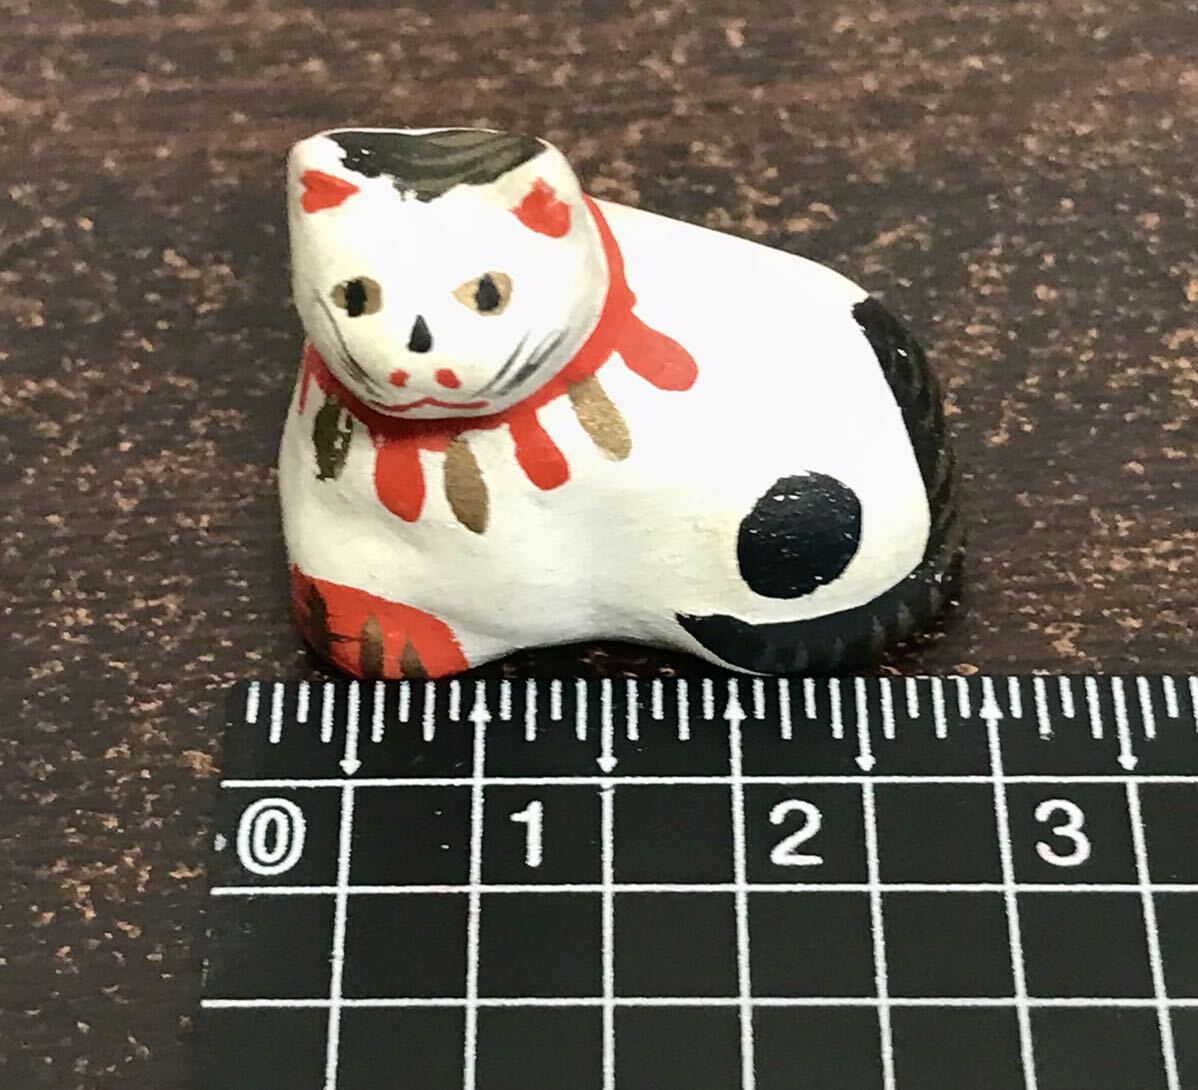 clobox*. earth toy river . eyes . two / hobby. cat 100 kind 10 number . Showa era 2 year /2cm rank / maneki-neko / earth doll /../ manners and customs doll / ornament / retro / antique /.. thing 